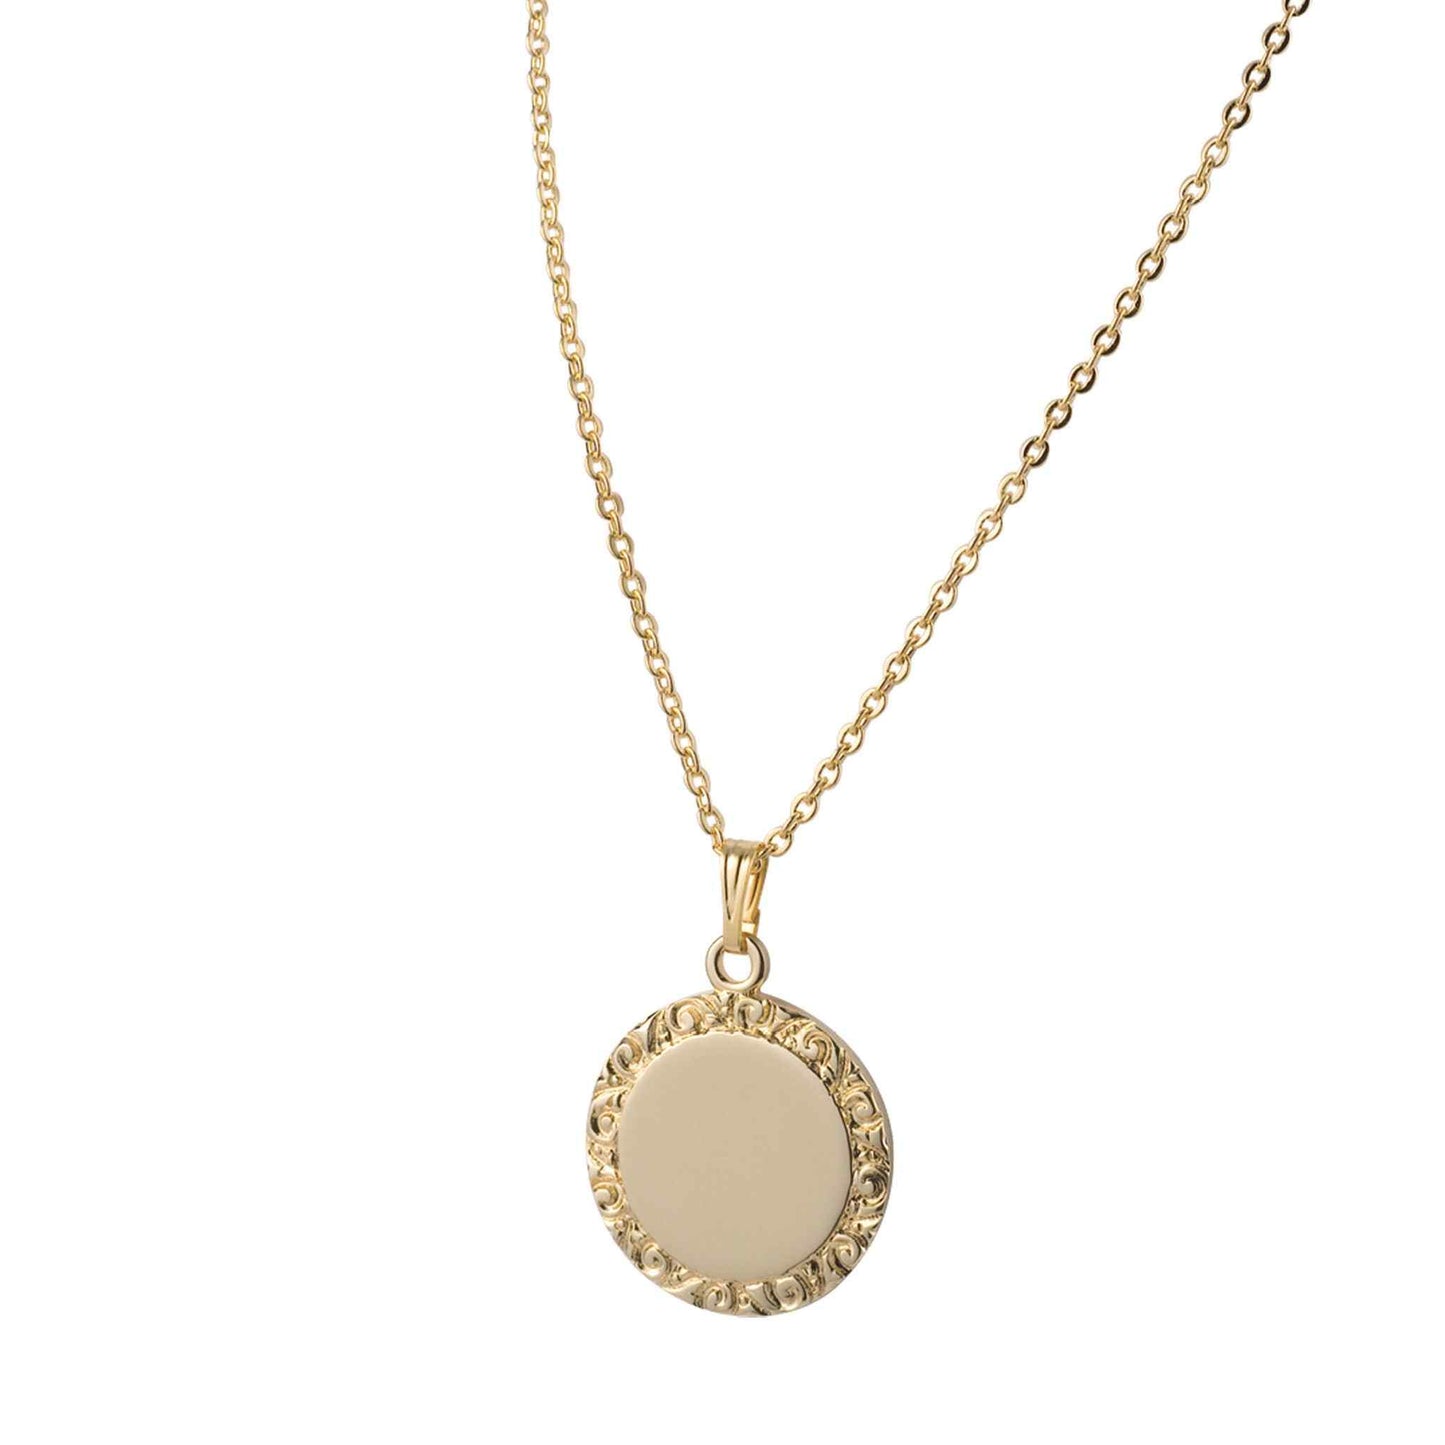 A polished round filigree pendant displayed on a neutral white background.